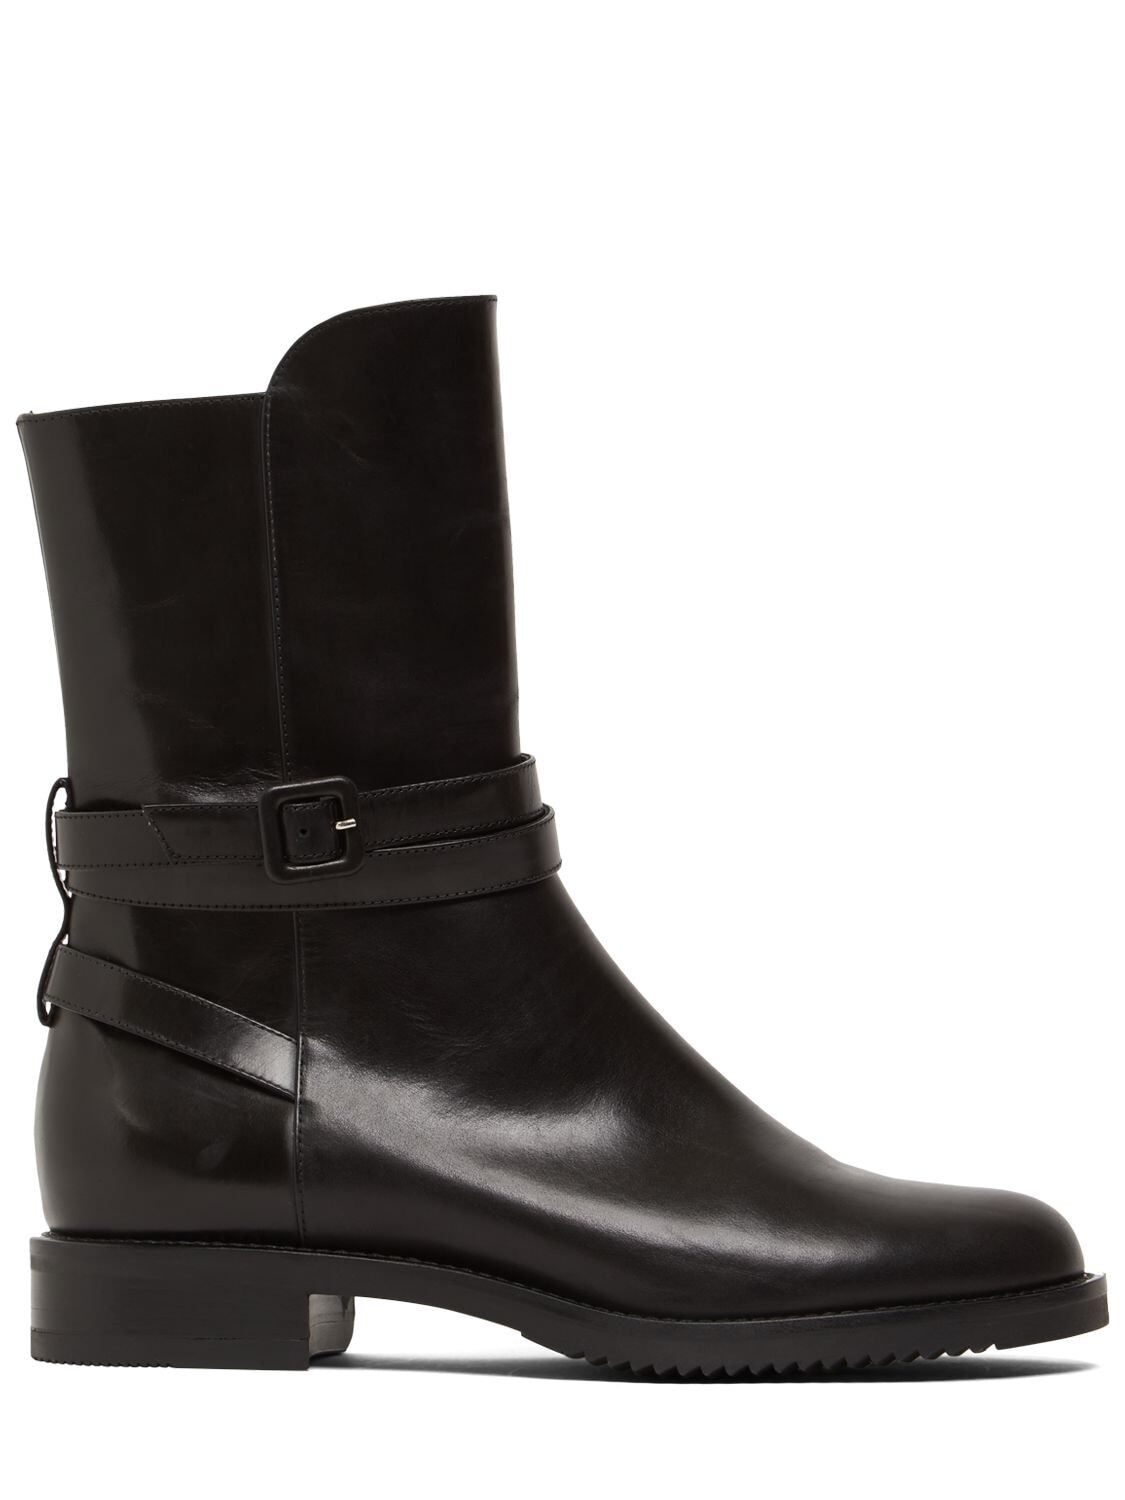 SERGIO ROSSI 30mm Ada Leather Ankle Boots in black